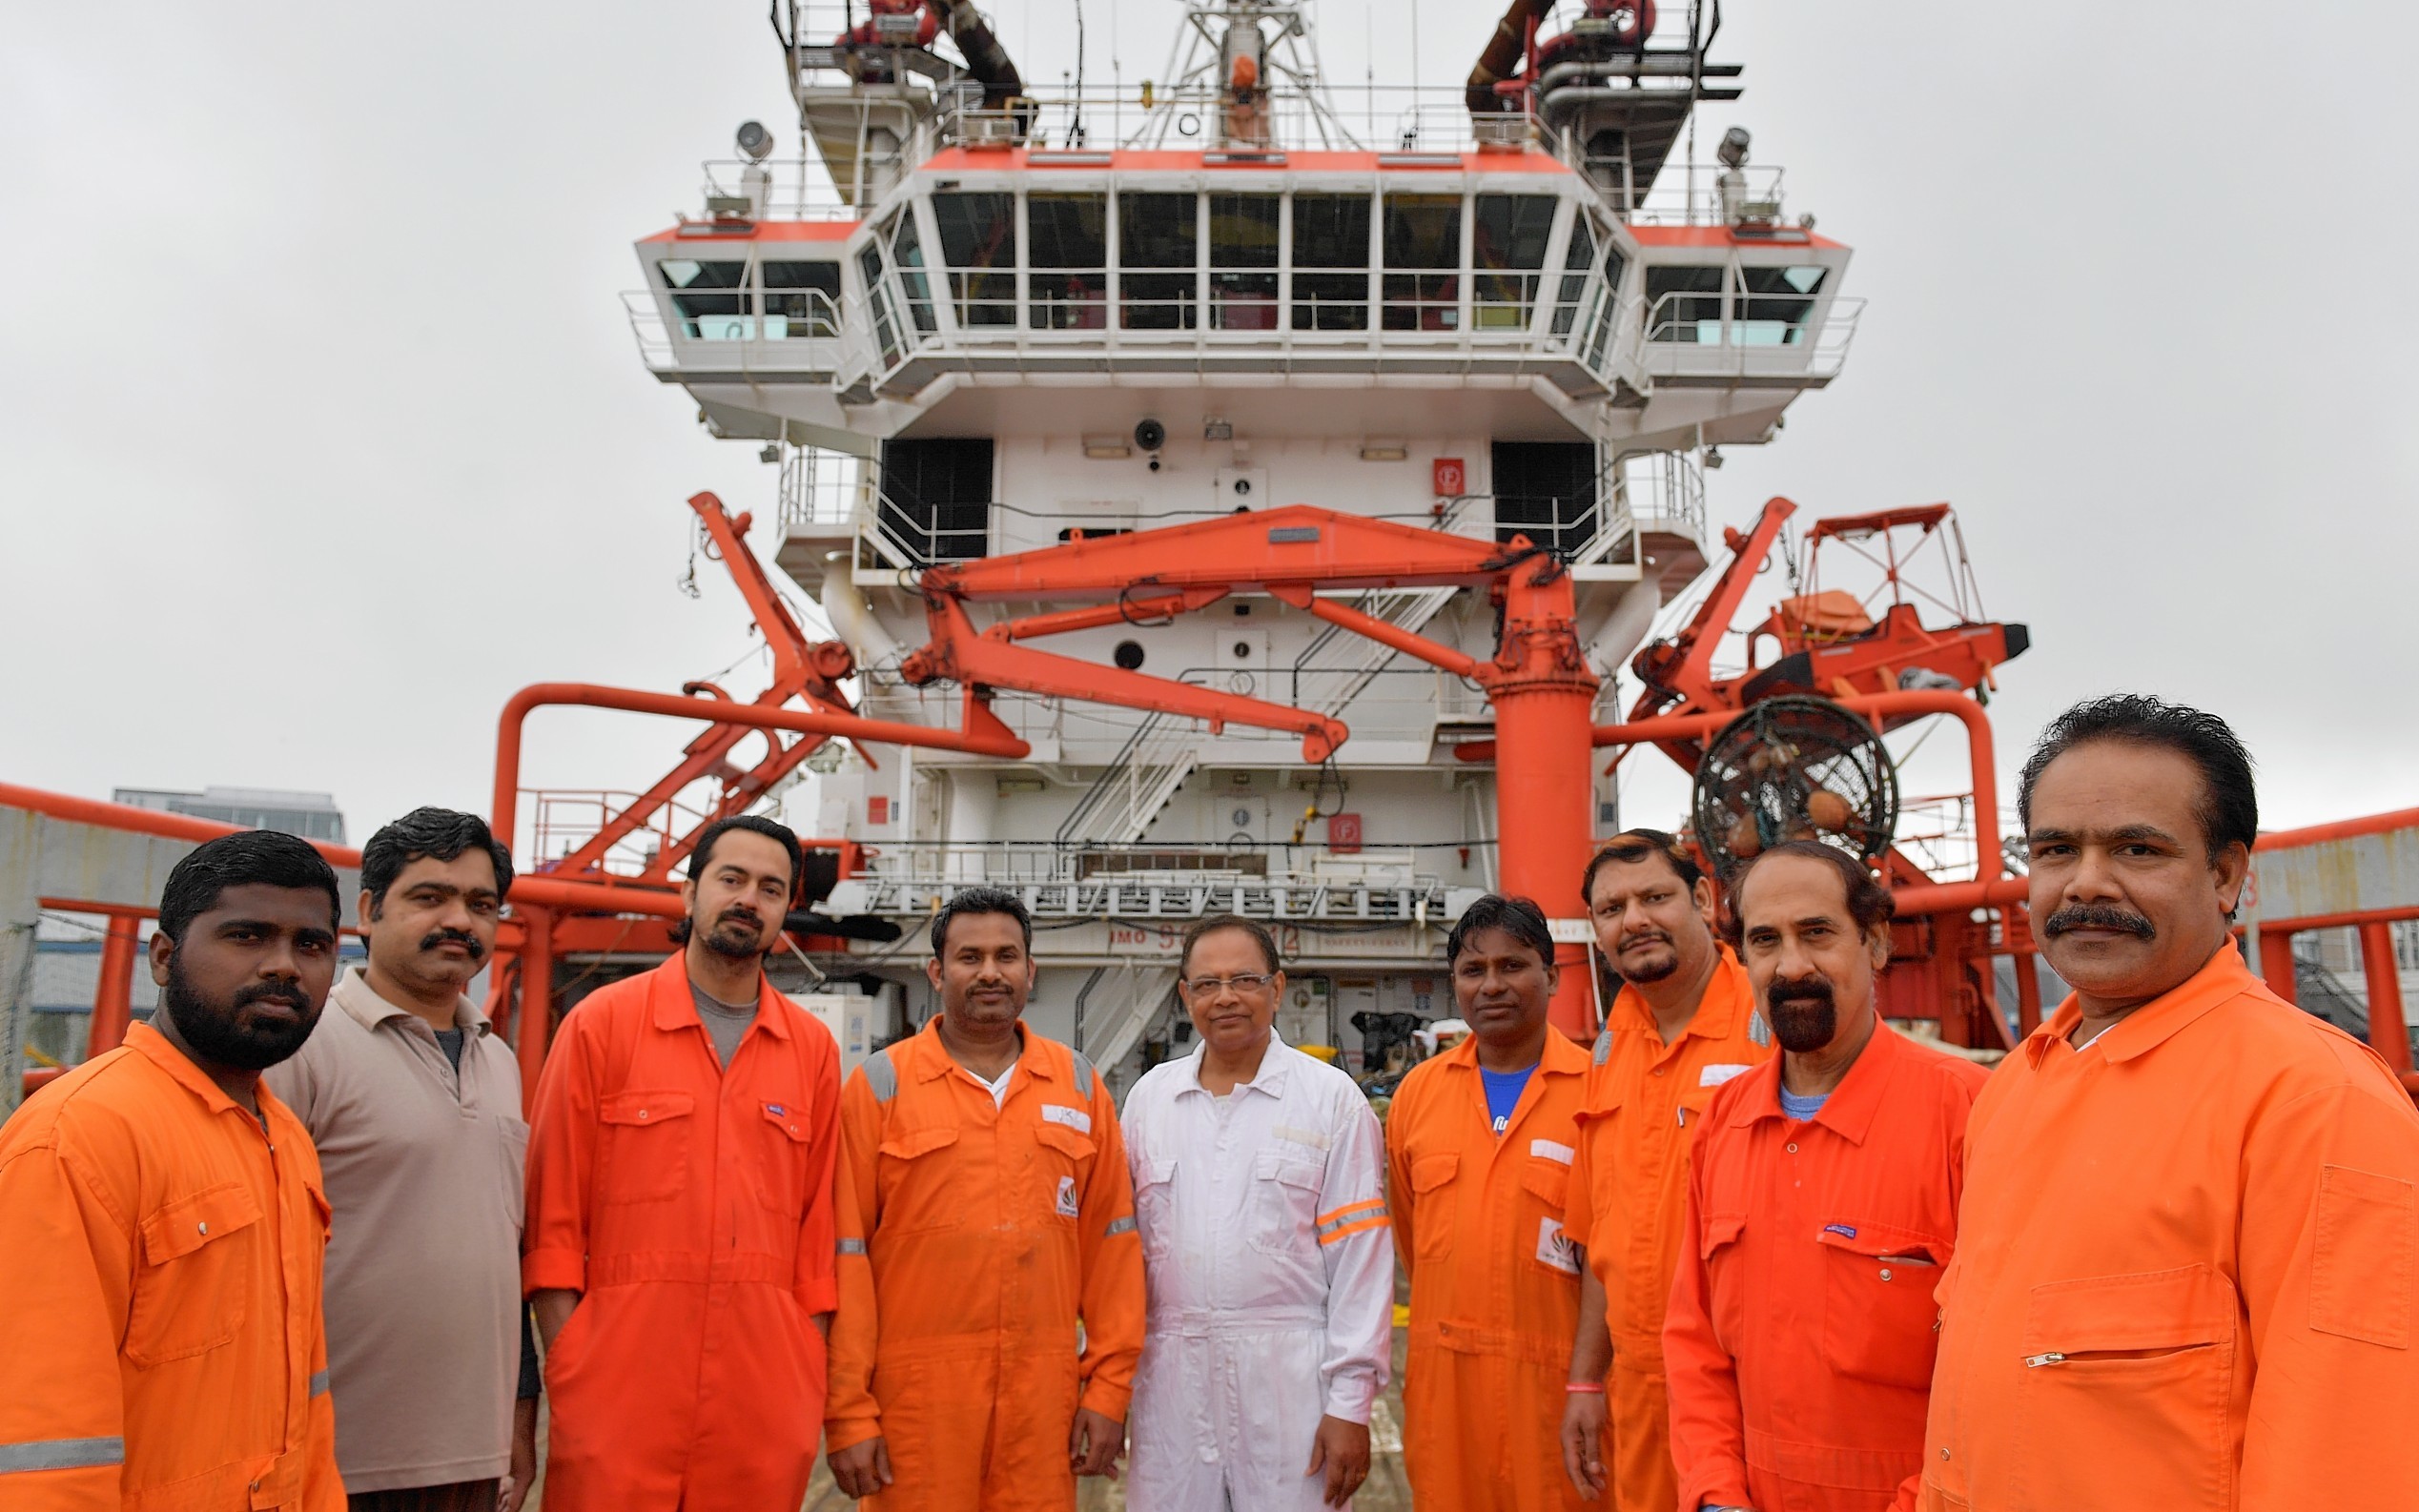 The crew of the Indian owned Malaviya Seven offshore vessel which has been detained in Aberdeen since last year for non payment of wages, are waiting on a court hearing which could decide if they can go home.   
Pictured - Some of the twelve man crew on the vessel.